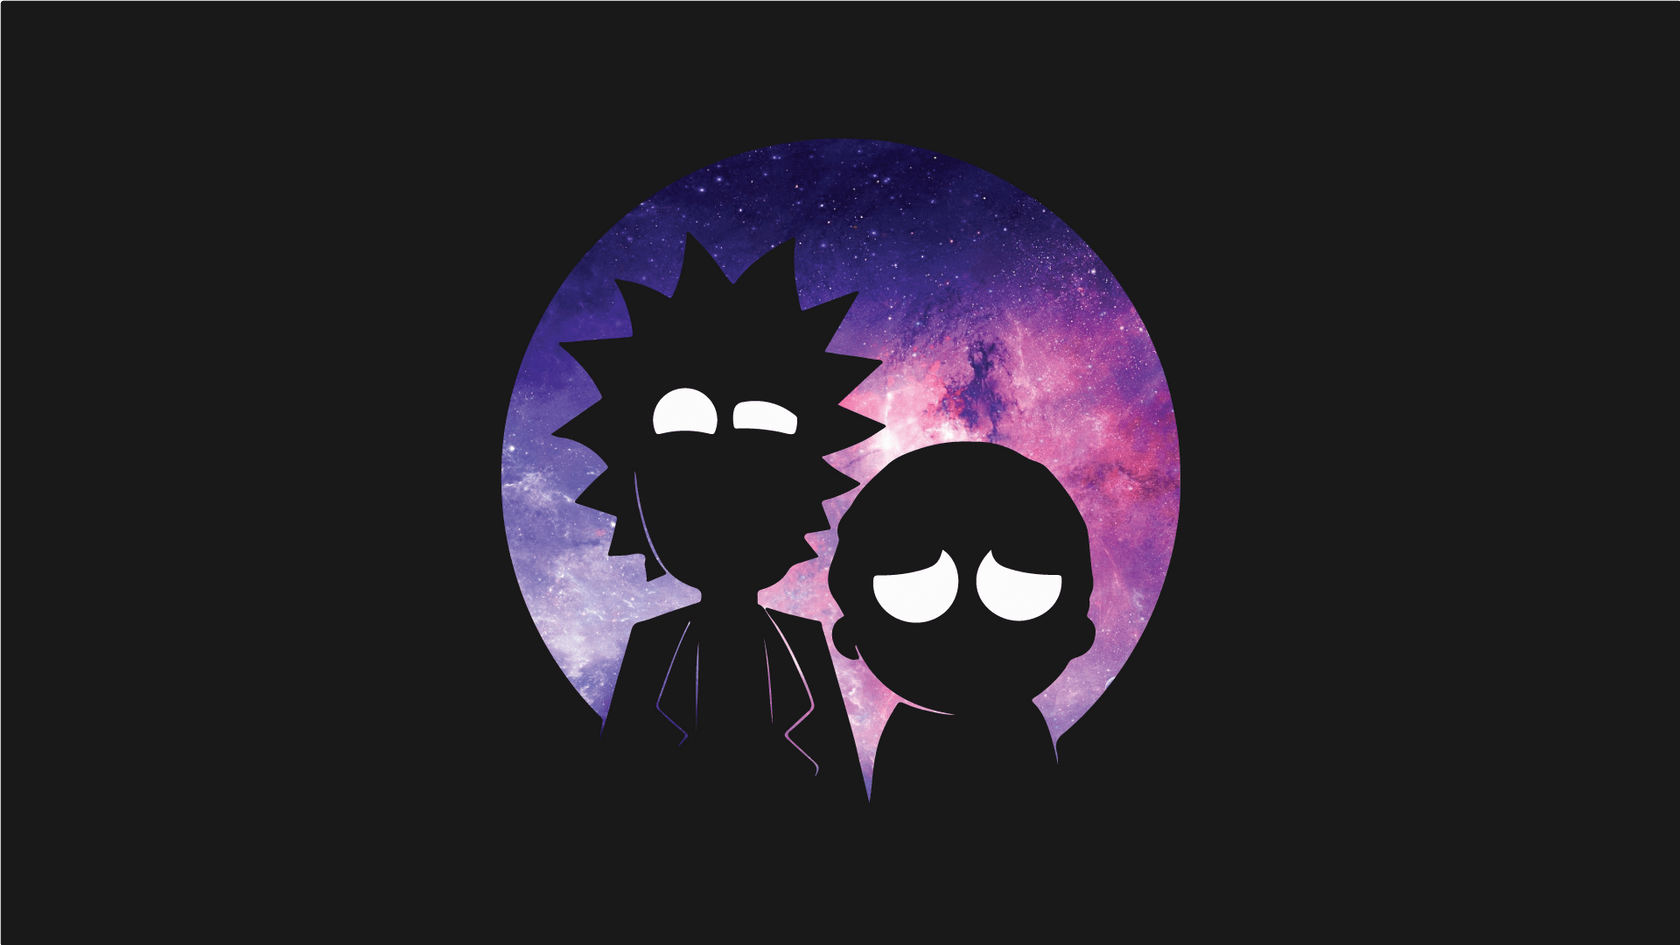 View Here Rick And Morty Men In Black Wallpaper Hd Image Rickmorty